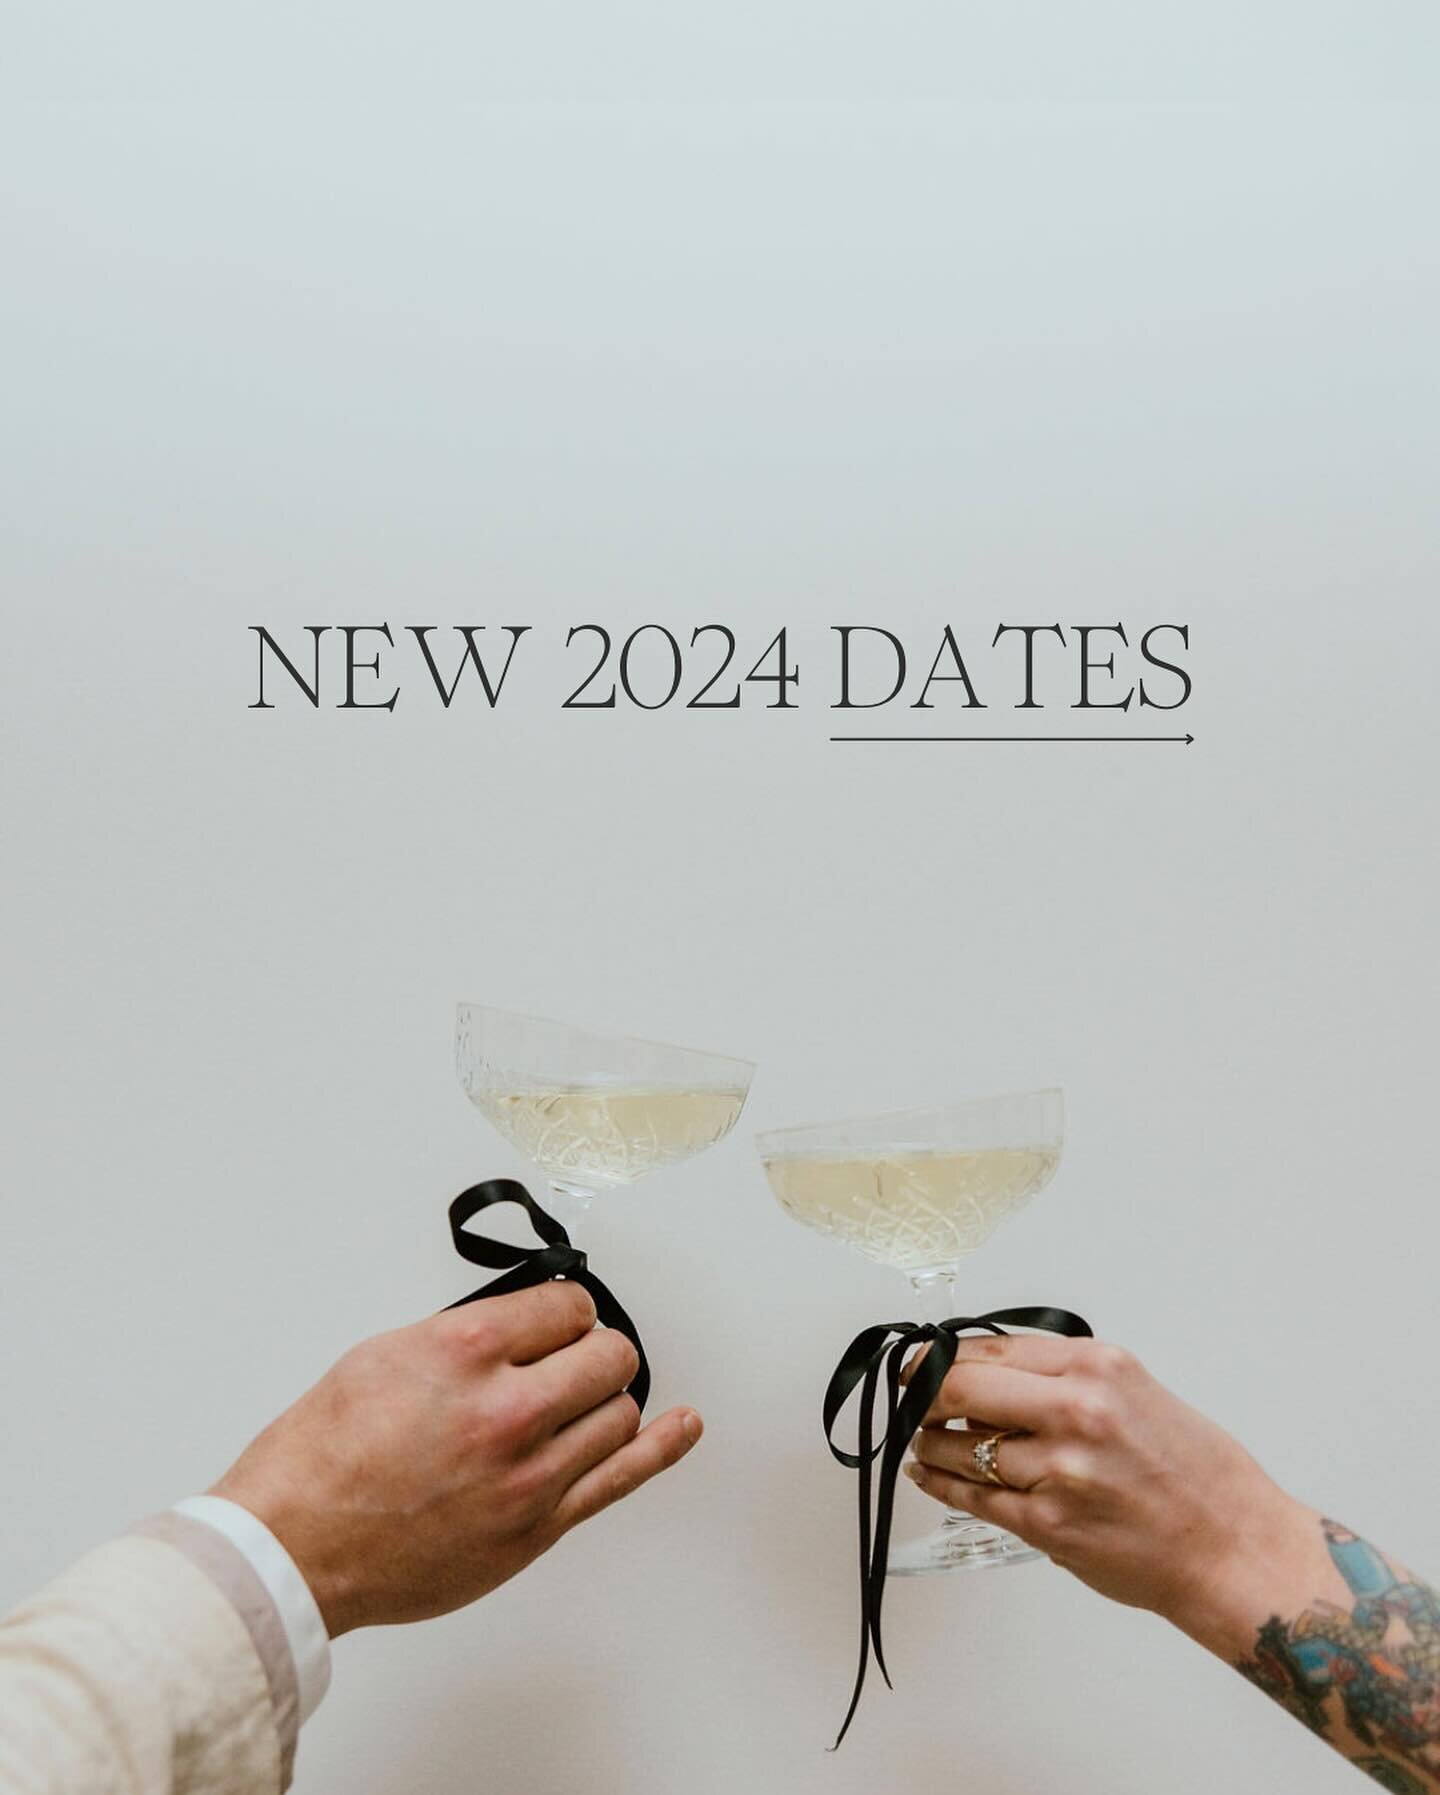 You asked, we listened! 🥂 Here are all of the new Reverie wedding dates:
- Saturday, July 6 @ West Avenue Cider
- Saturday, August 3 @ West Avenue Cider
- Saturday, September 7 @ Sanford Hall

All dates have 11:30am brunch and 4:30pm evening time sl